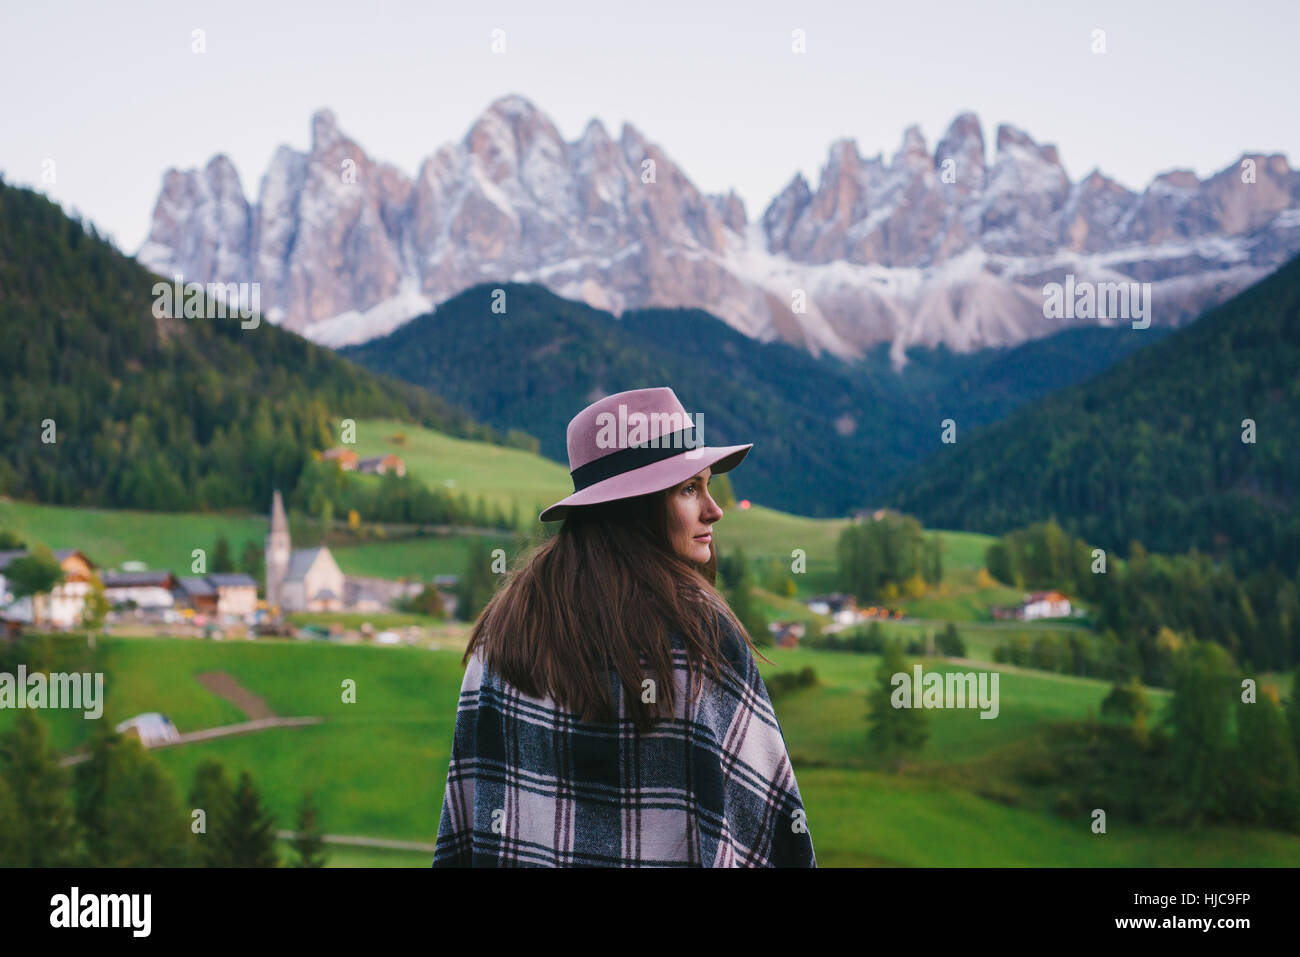 Woman looking over shoulder, Santa Maddalena, Dolomite Alps, Val di Funes (Funes Valley), South Tyrol, Italy Stock Photo